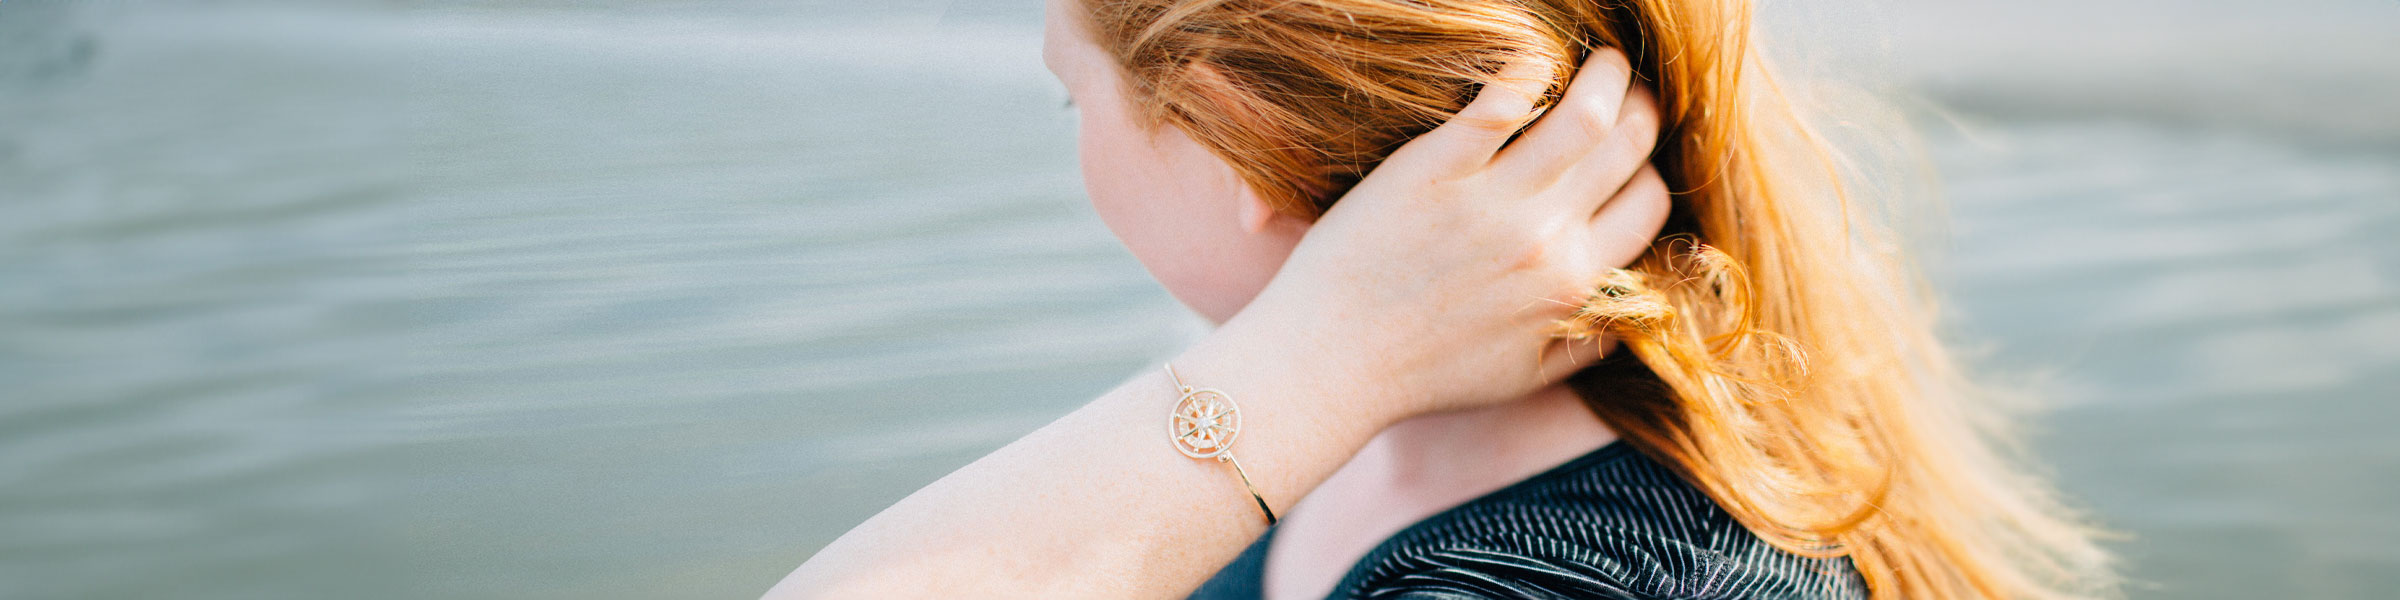 Woman with red hair looking out on water with gold compass rose bracelet